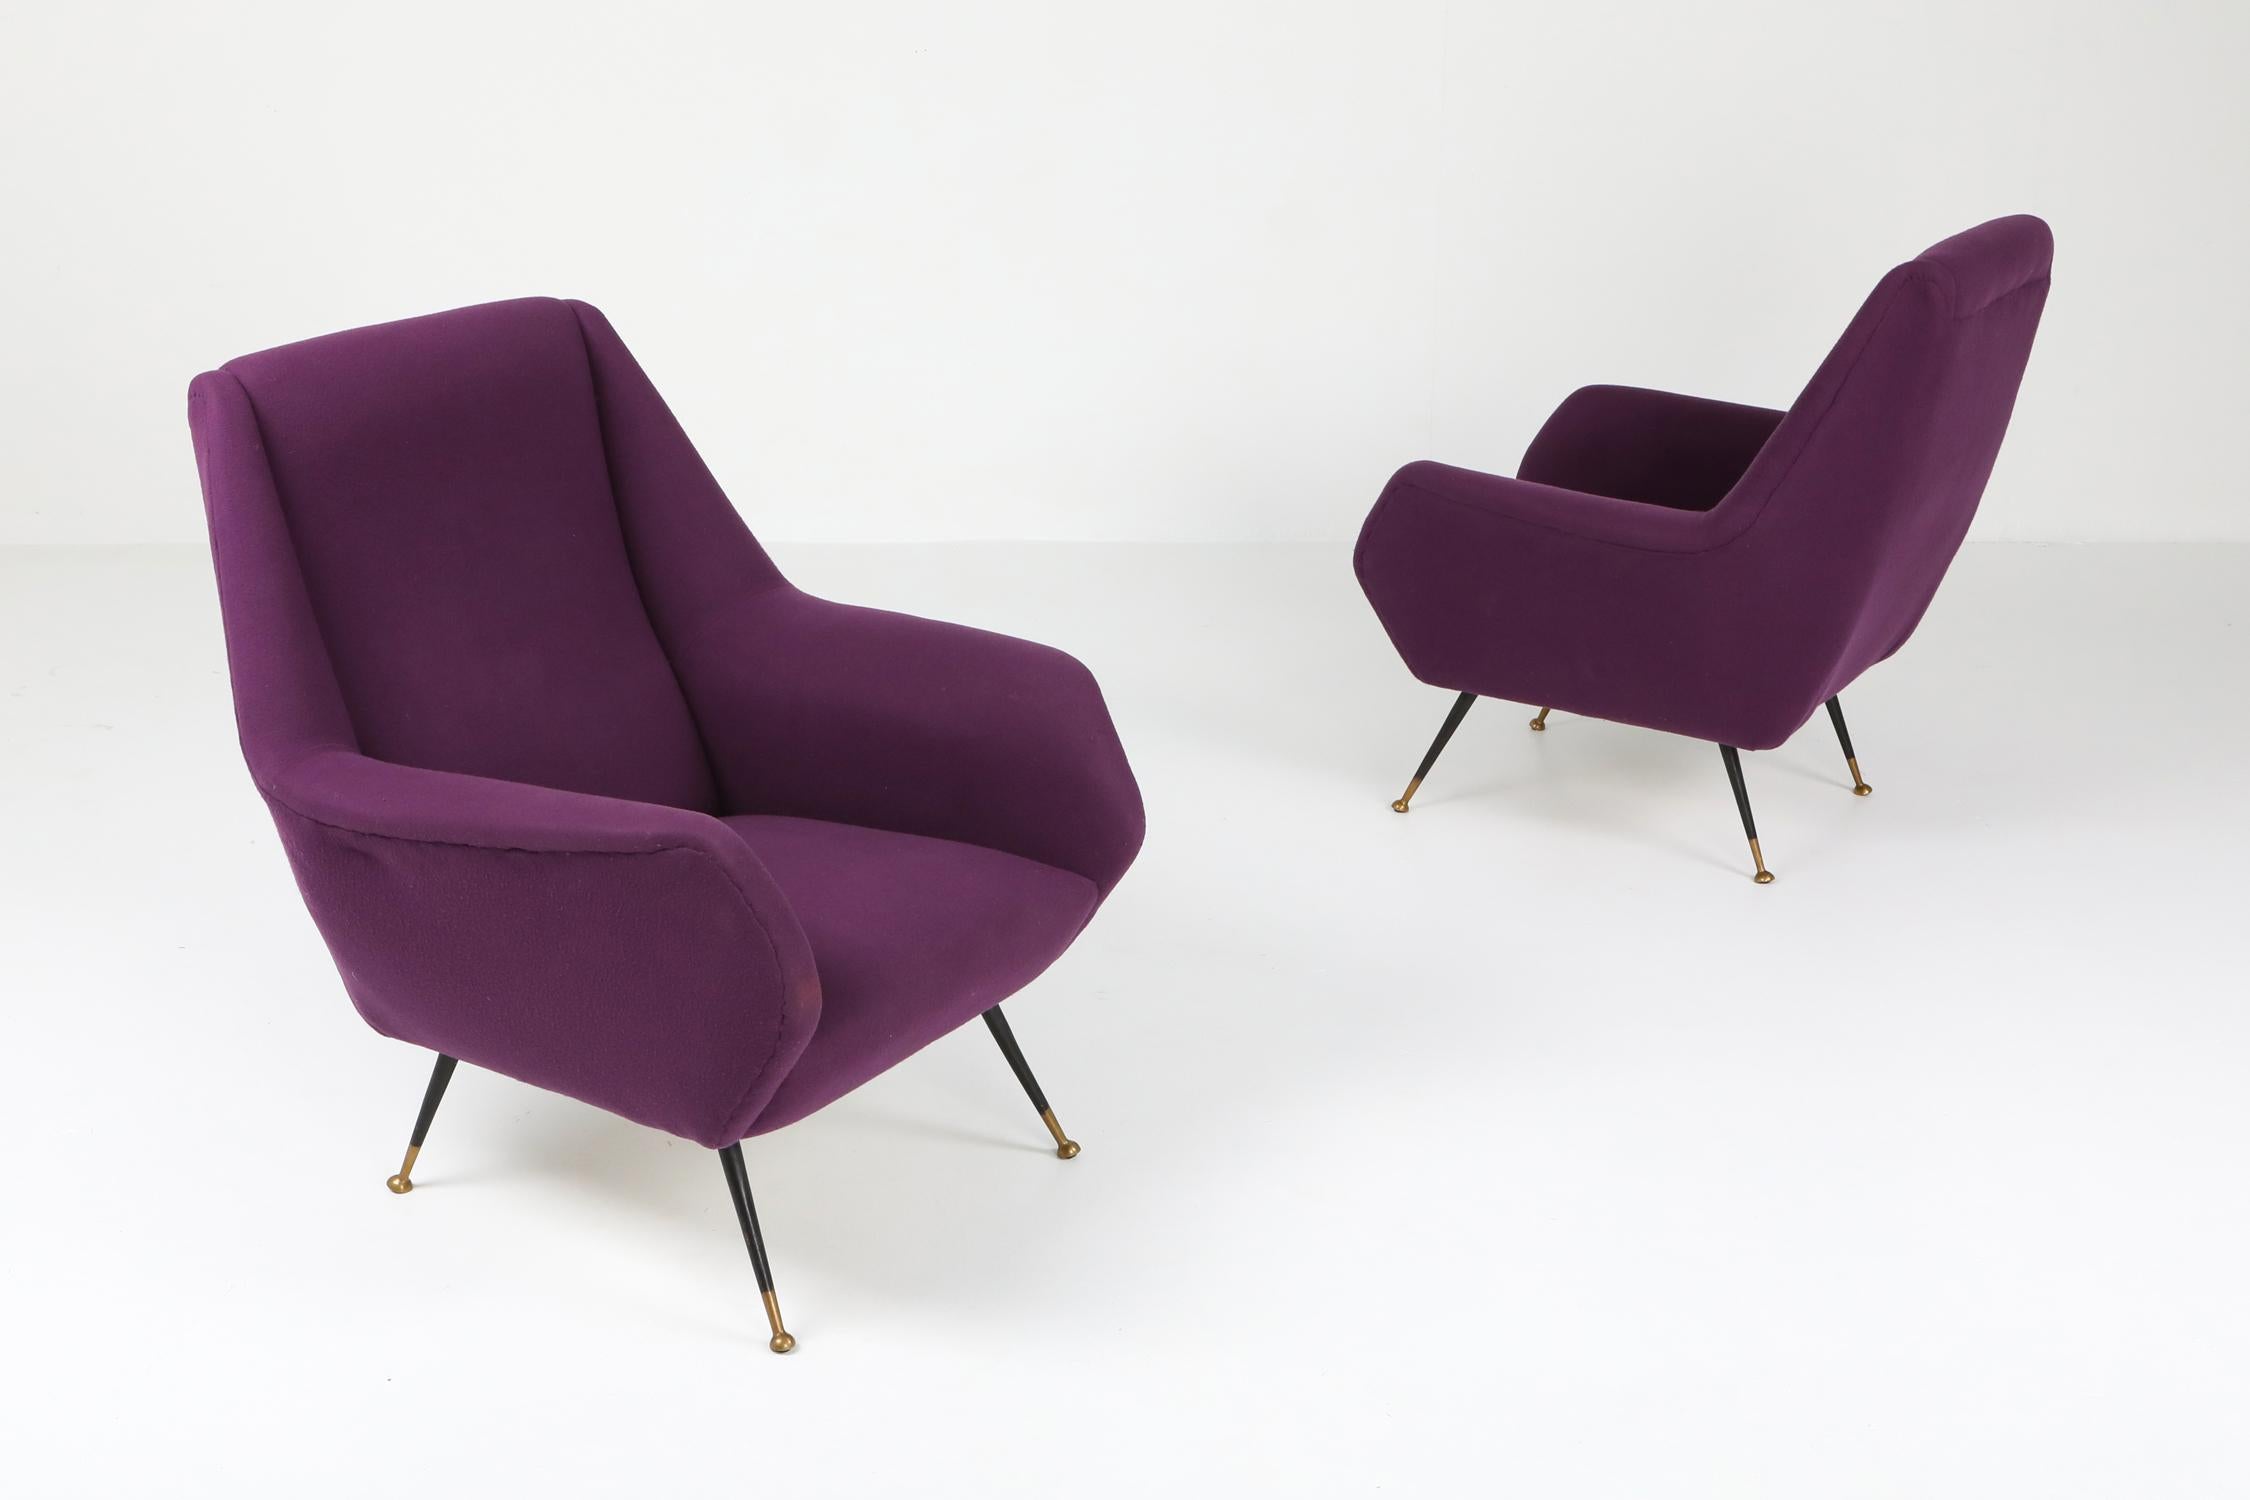 Italian pair of armchairs, by Ico Parisi, purple fabric.

Black metal legs which end on brass round feet.
1950s Italian chic chairs which would fit well in an eclectic Hollywood Regency inspired interior.
  